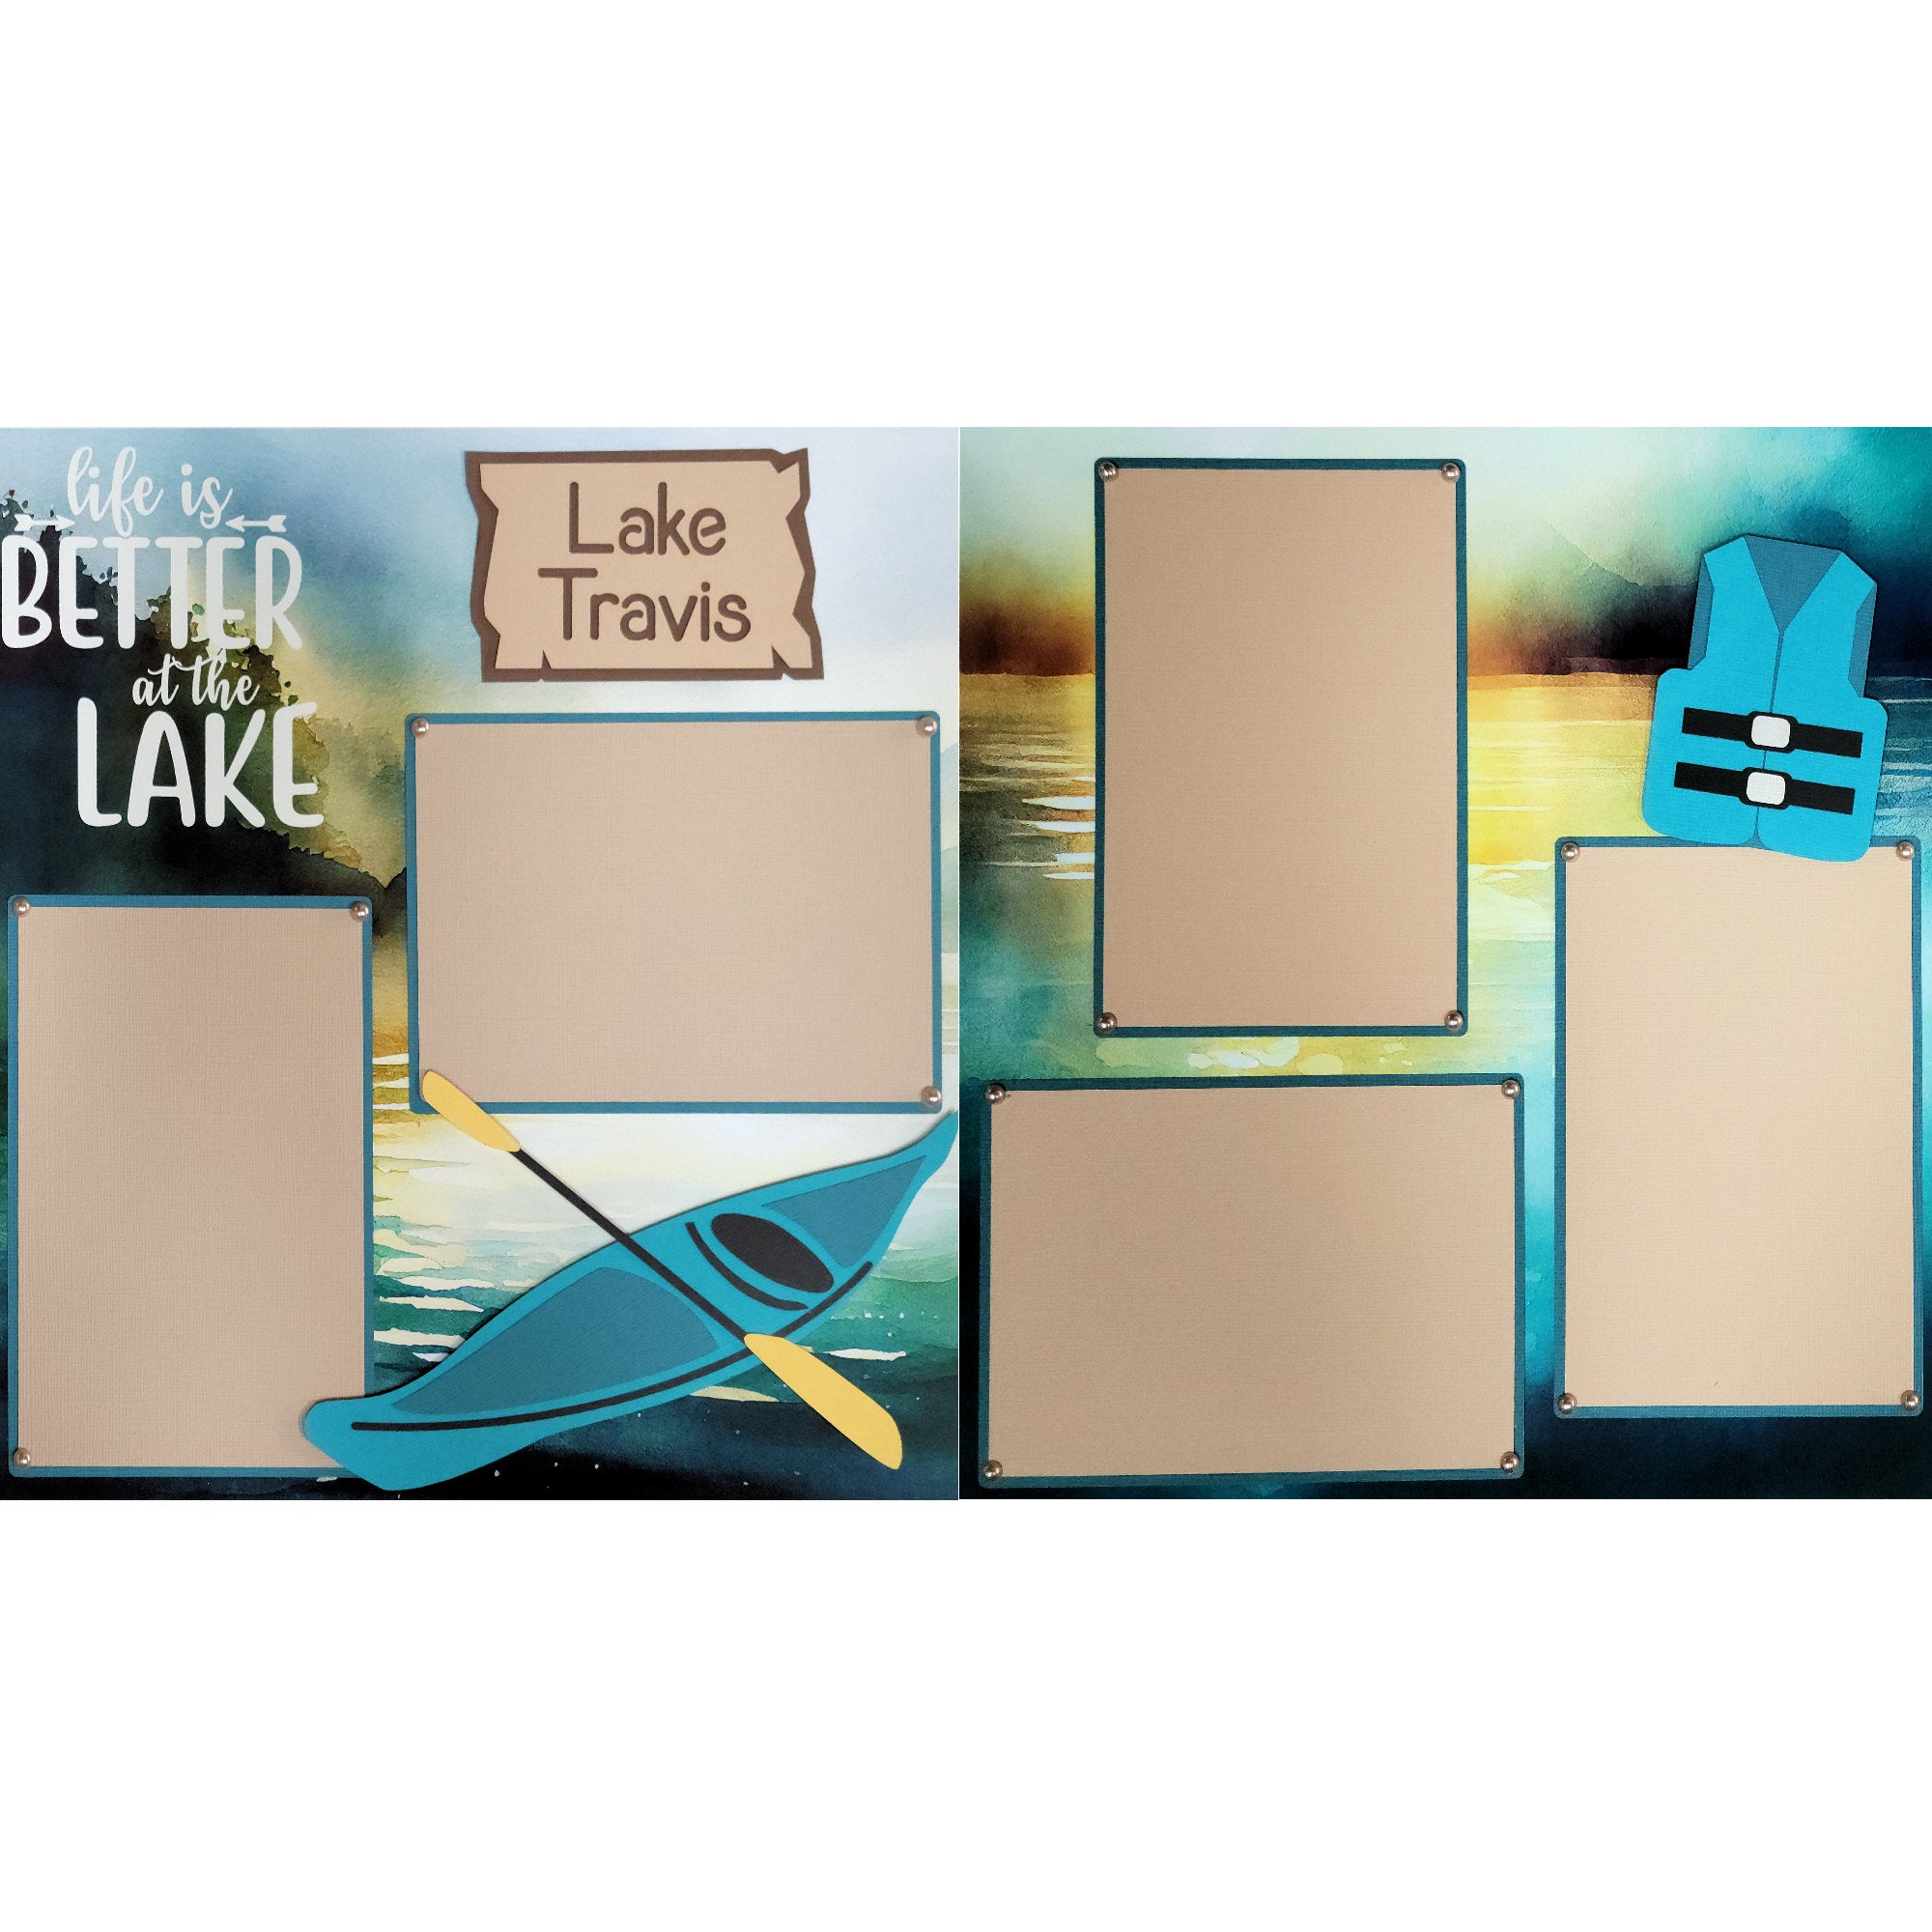 Life's Better On The Lake Kayak 2 - 12 x 12 Page Scrapbook Premade by SSC Designs